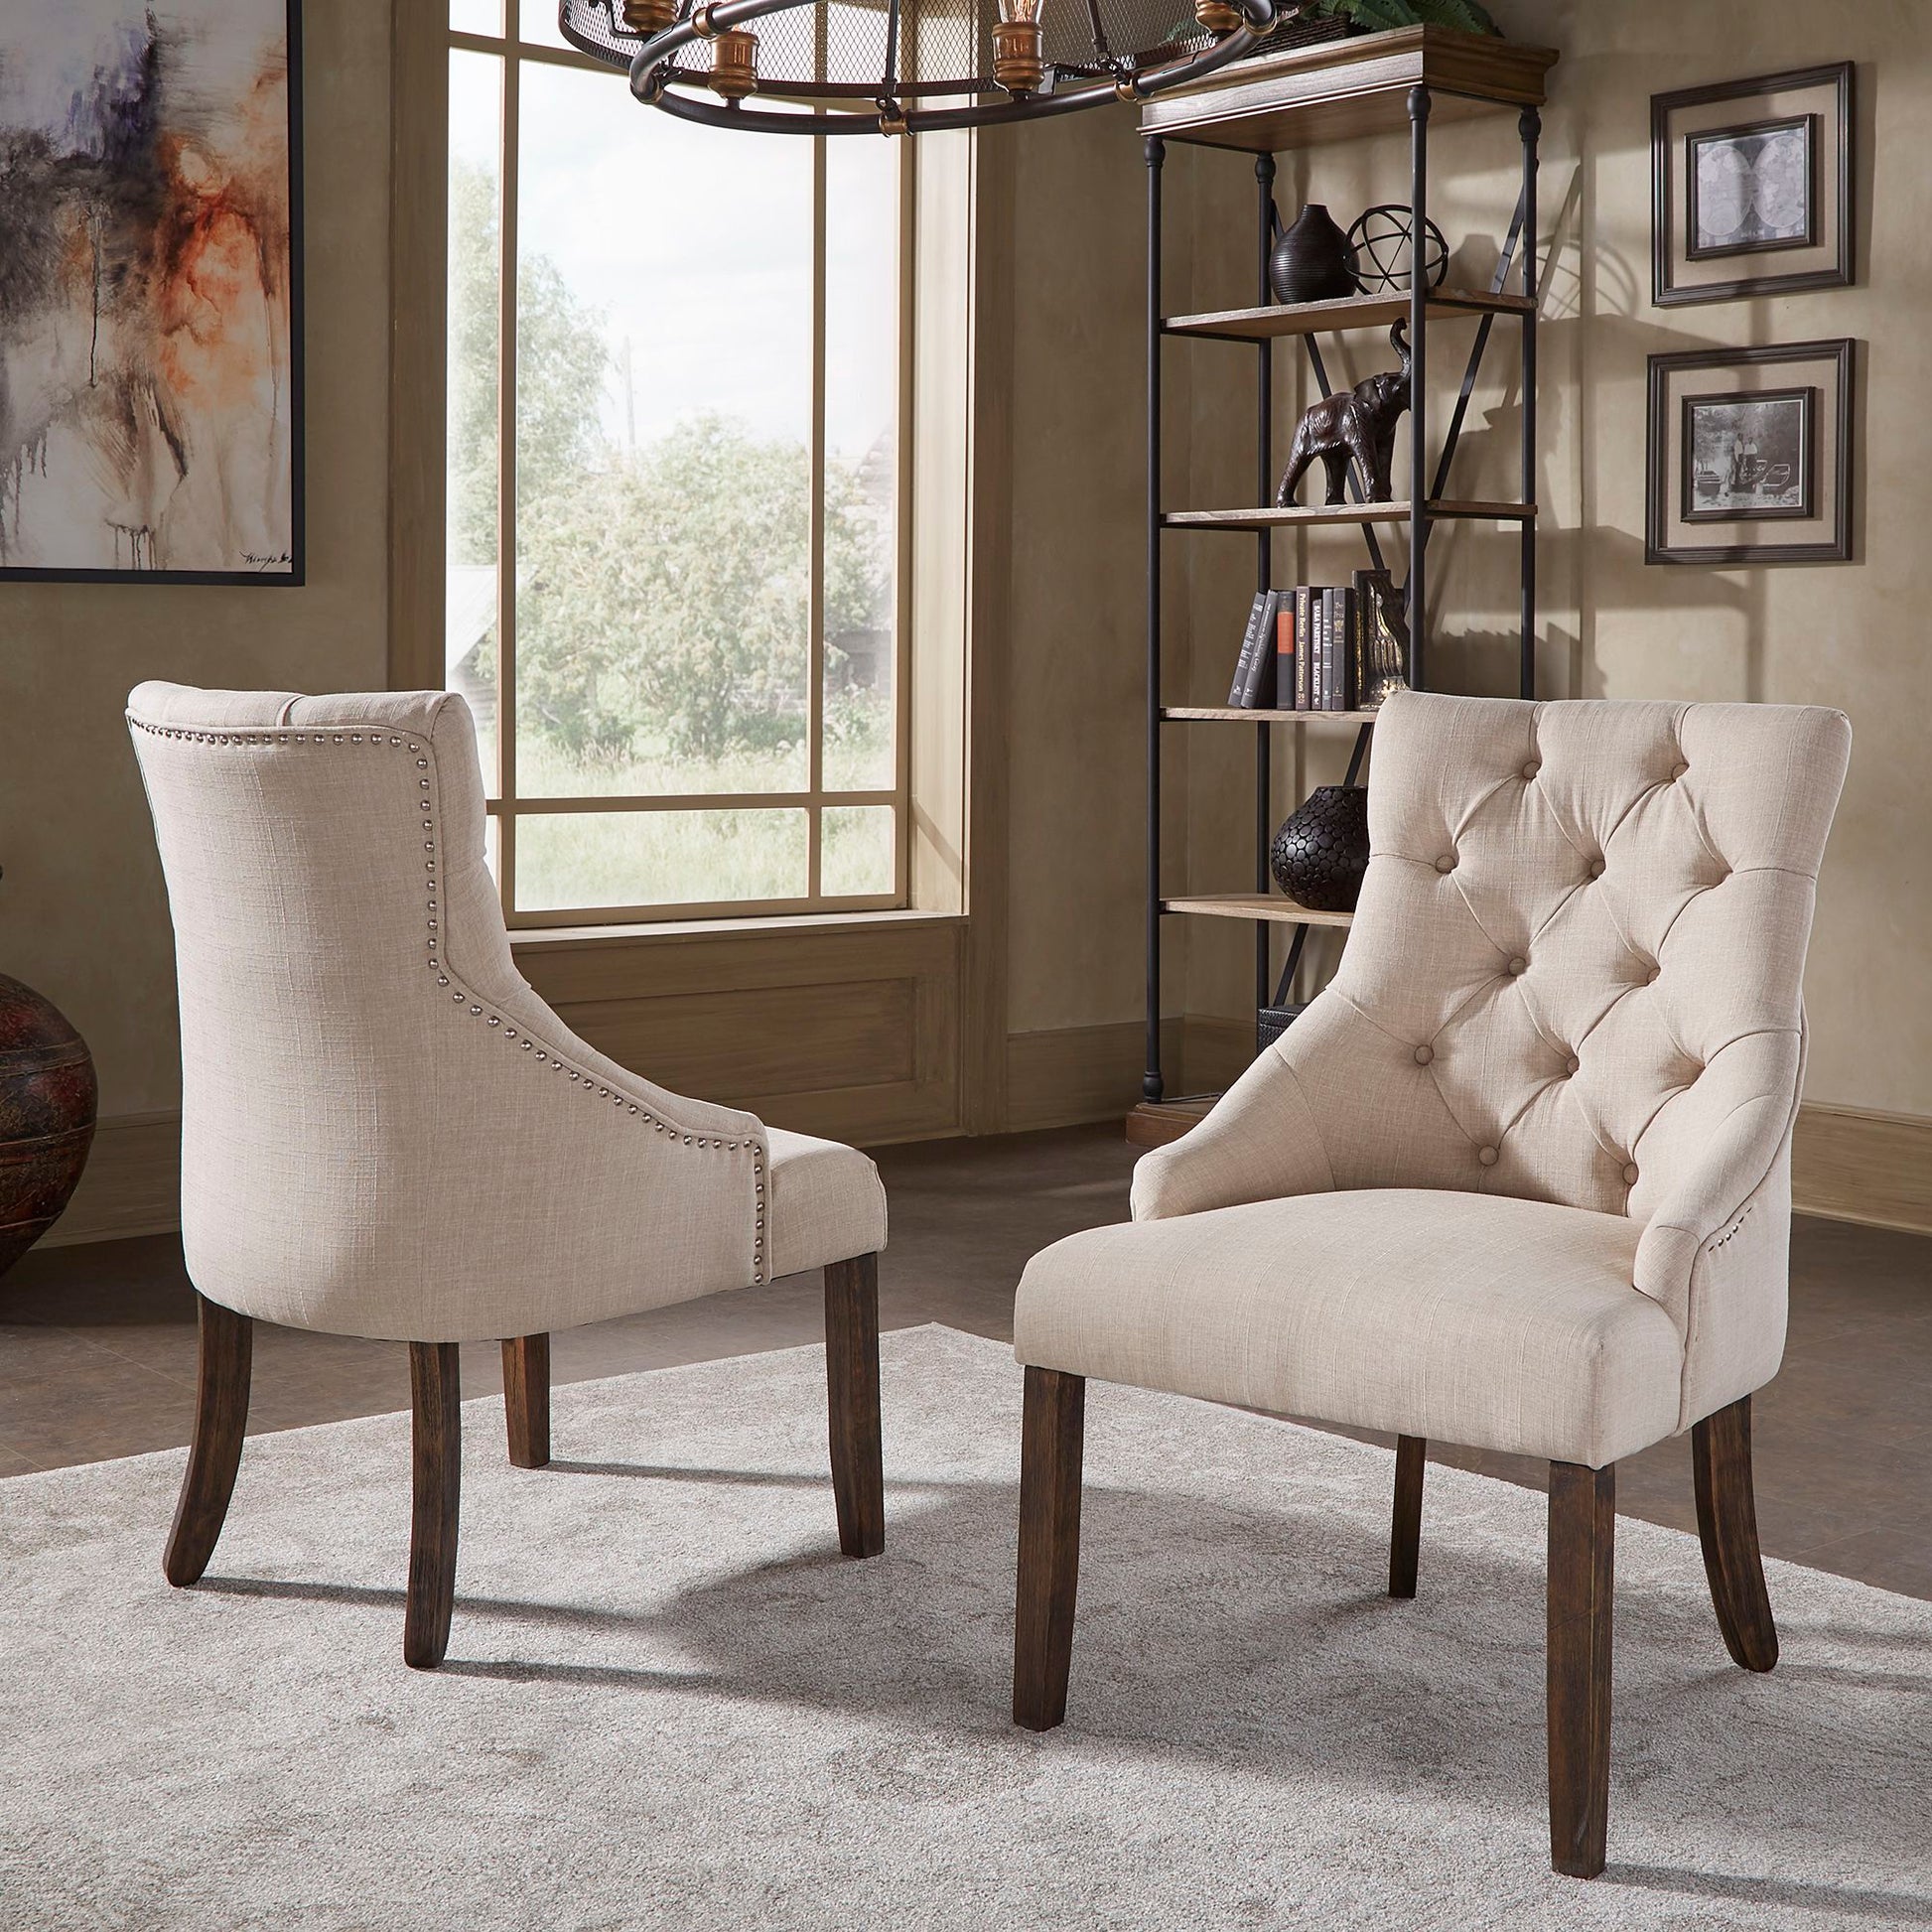 Linen Curved Back Tufted Dining Chairs (Set of 2) - Beige Linen by Inspire Q Artisan